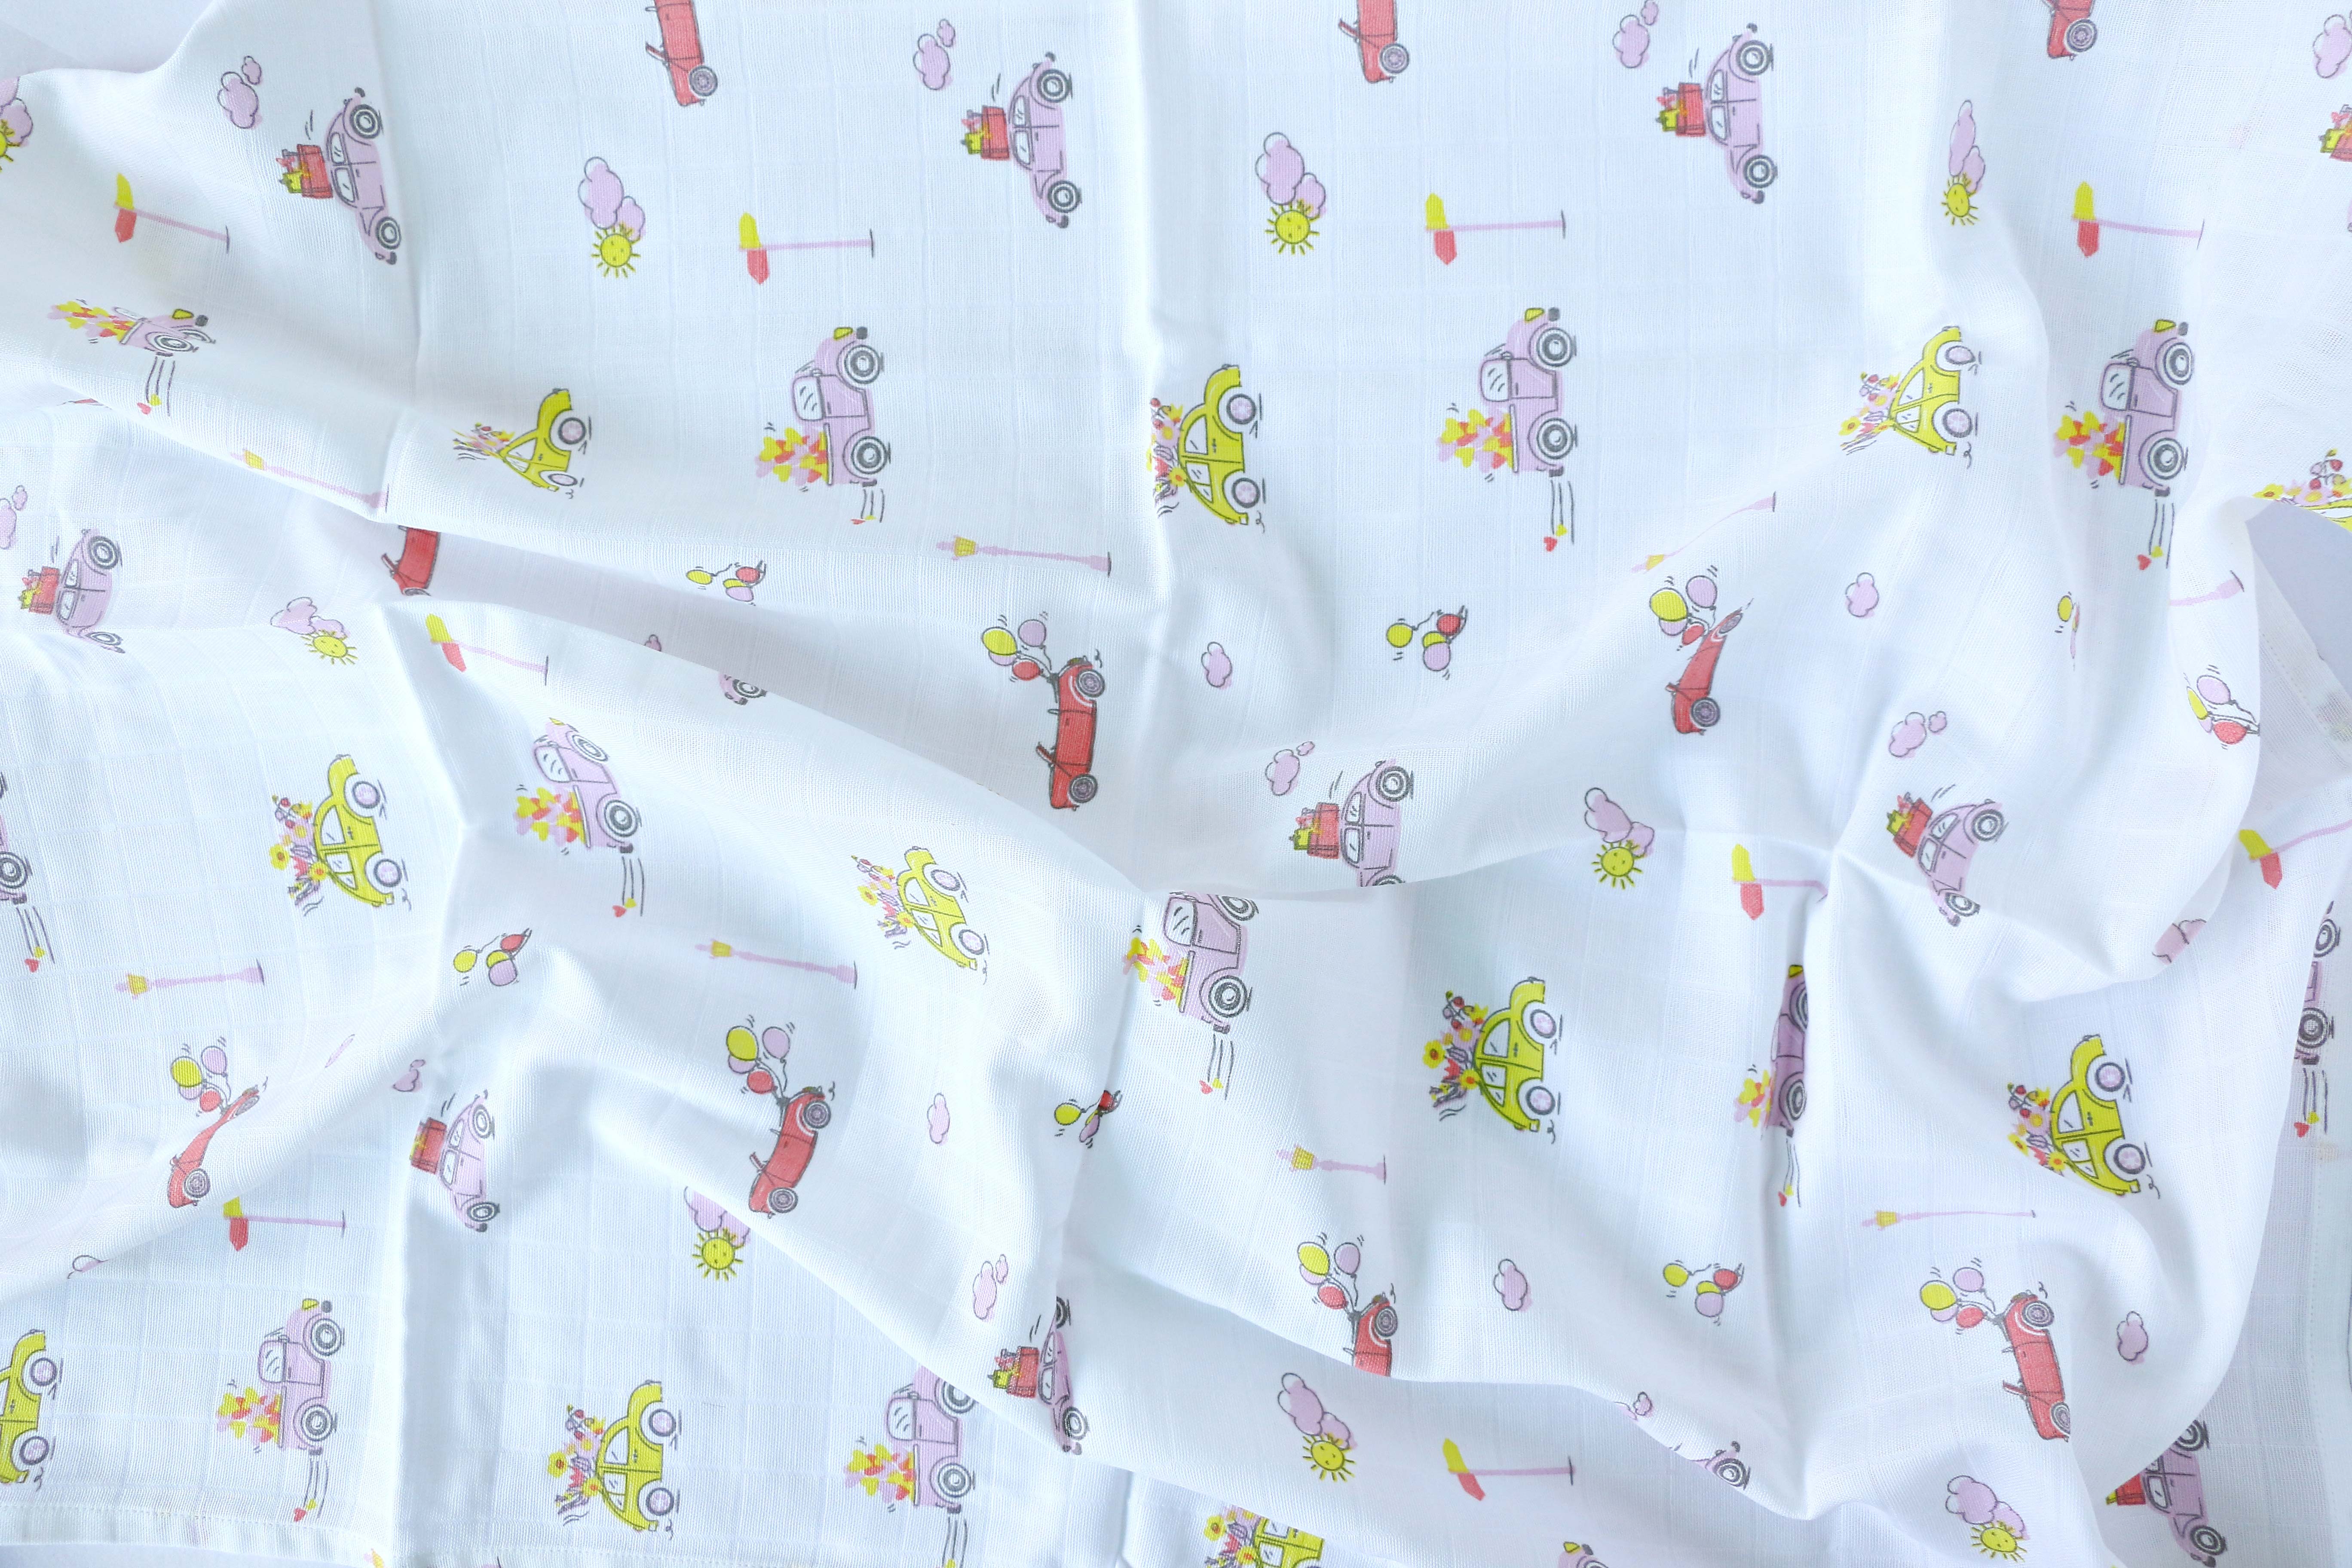 Loads Of Love 2.0 - Organic Cotton ( double layer ) Baby Muslin Swaddle/ Blanket - 110 X 110 cms